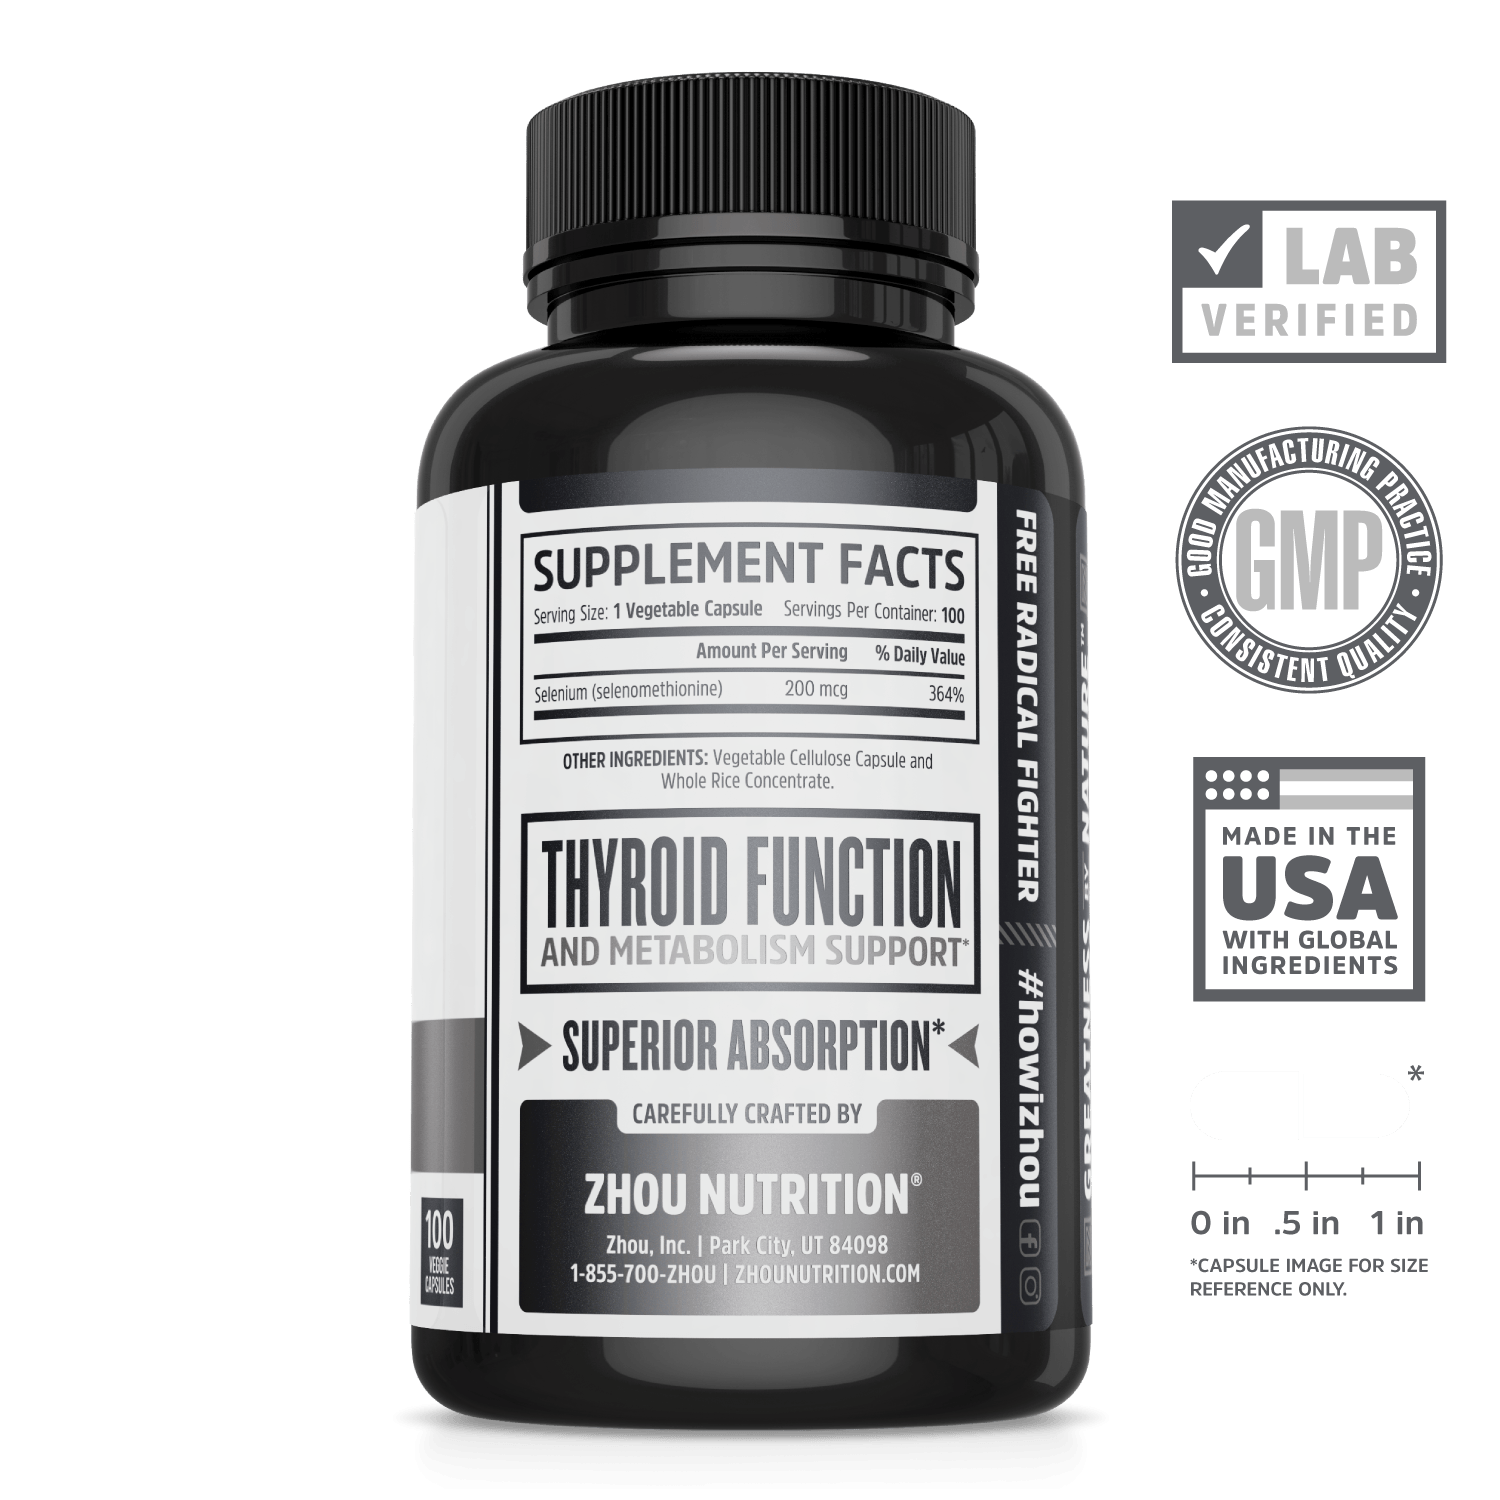 Zhou Nutrition Selenium Essential Micronutrient Supplement. Lab verified, good manufacturing practices, made in the USA with global ingredients.